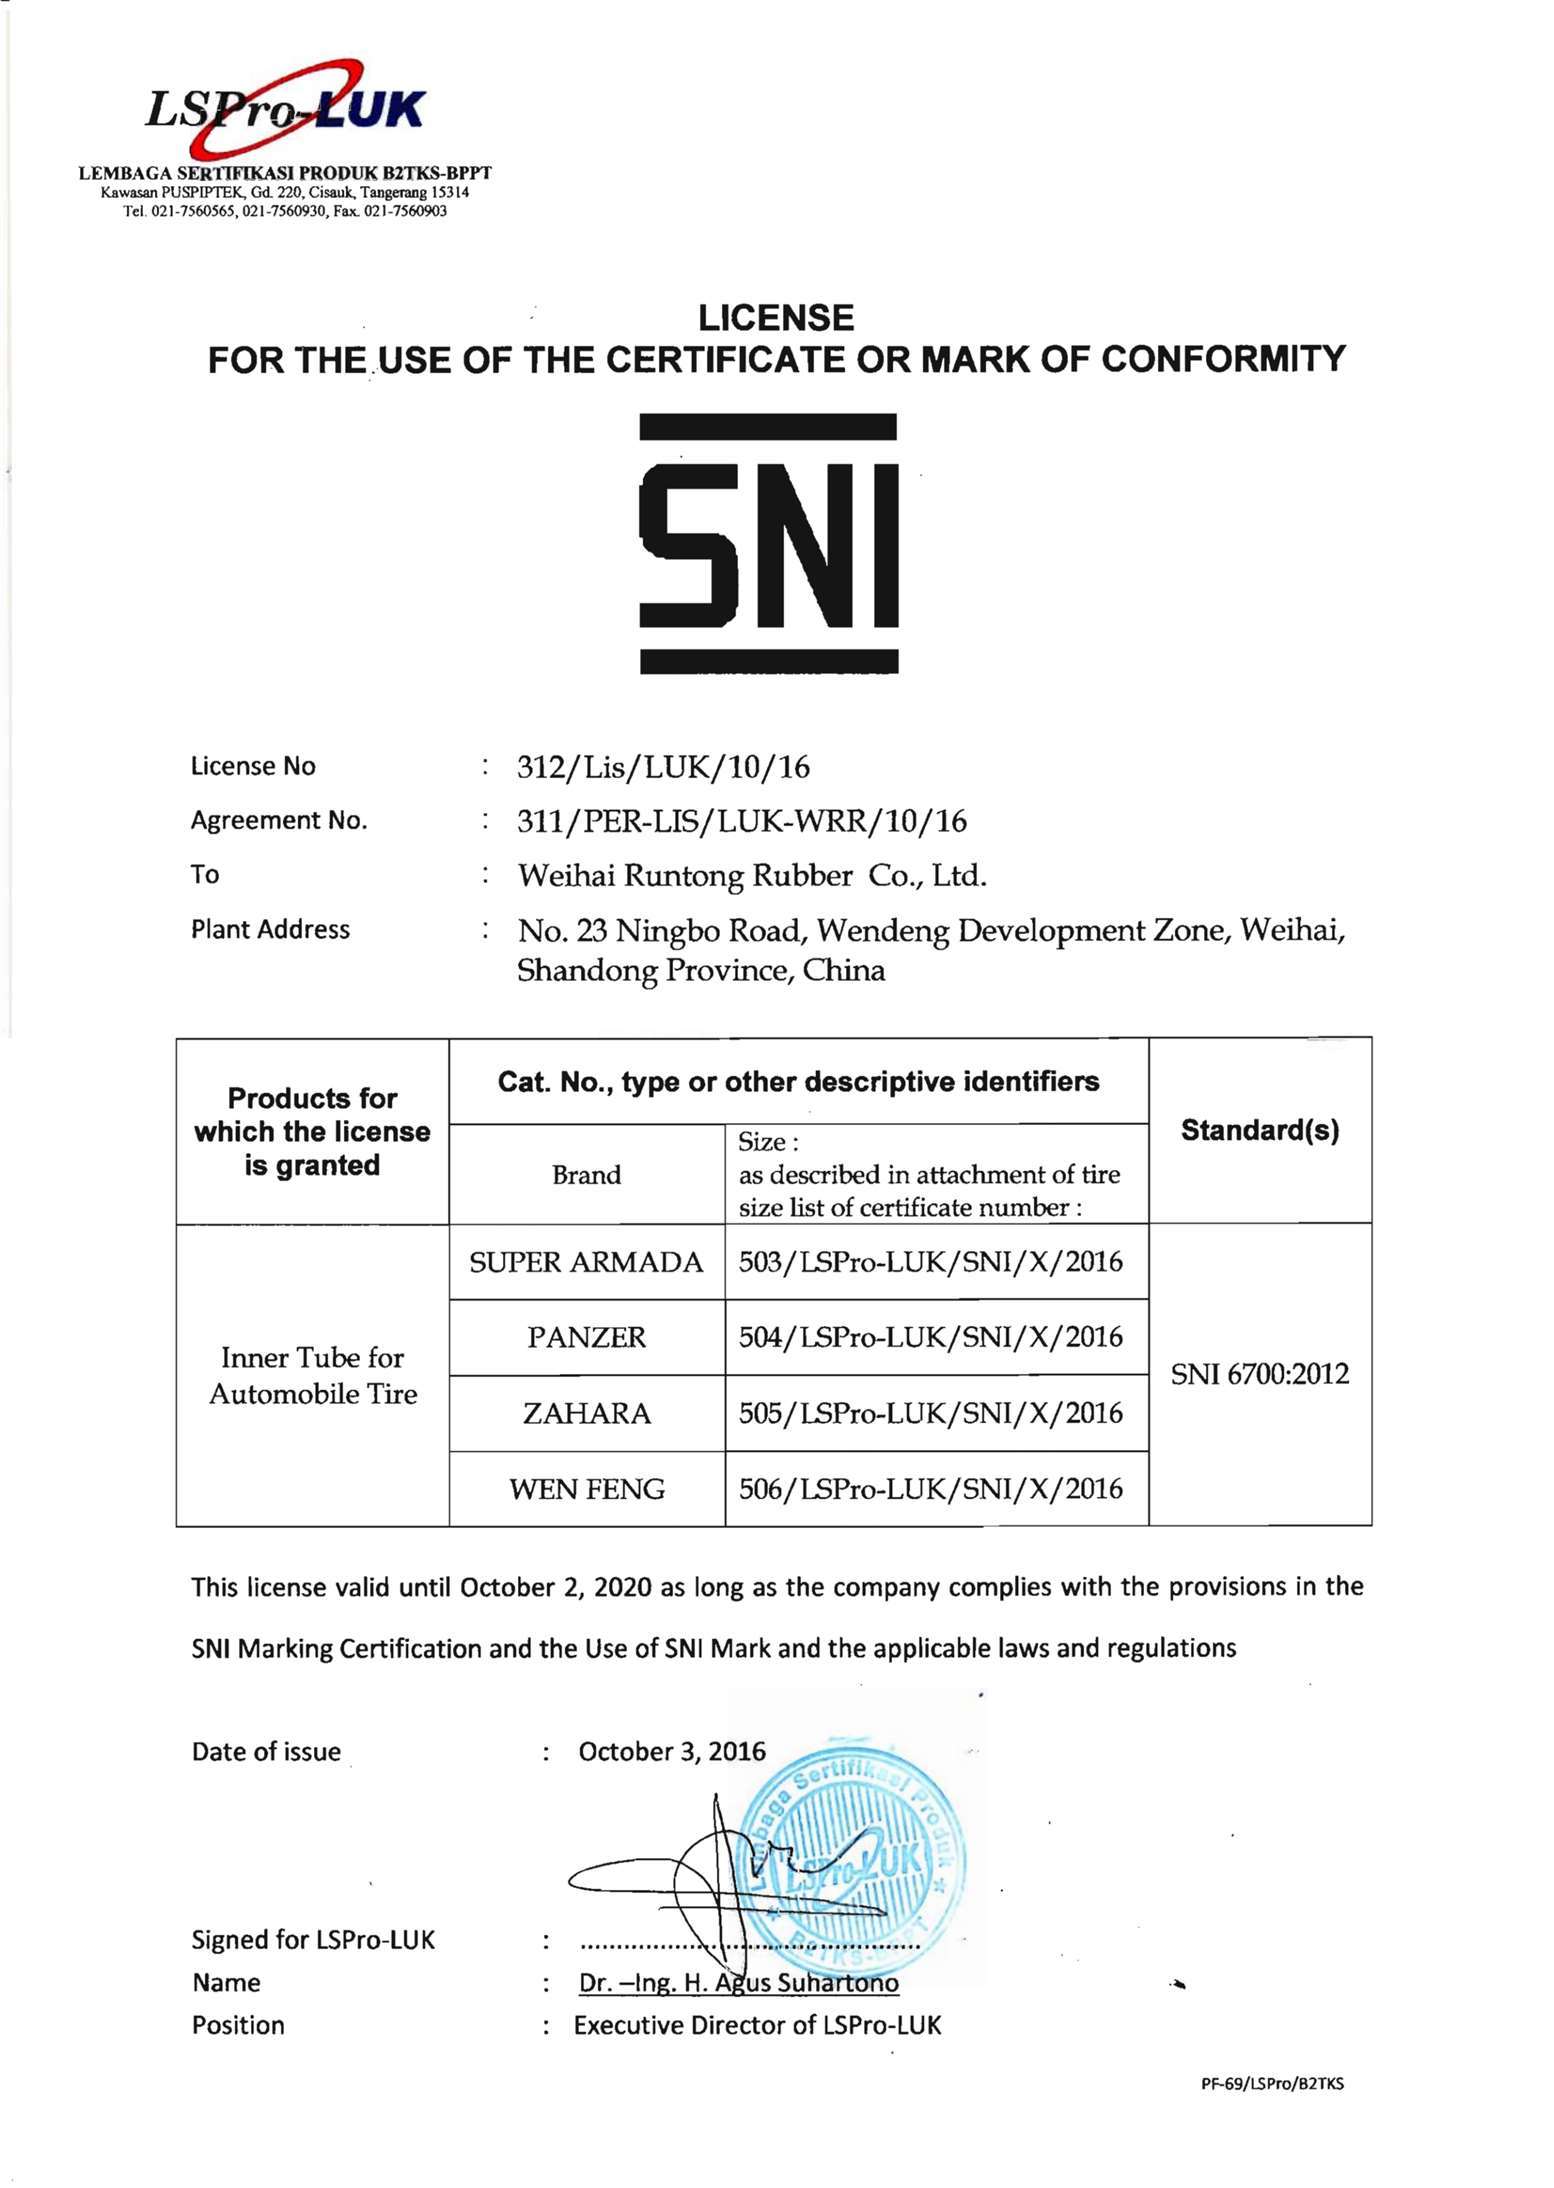 SNI 6700:2012 LICENSE FOR THE USE OF THE CERTIFICATE OR MARK OF CONFORMITY